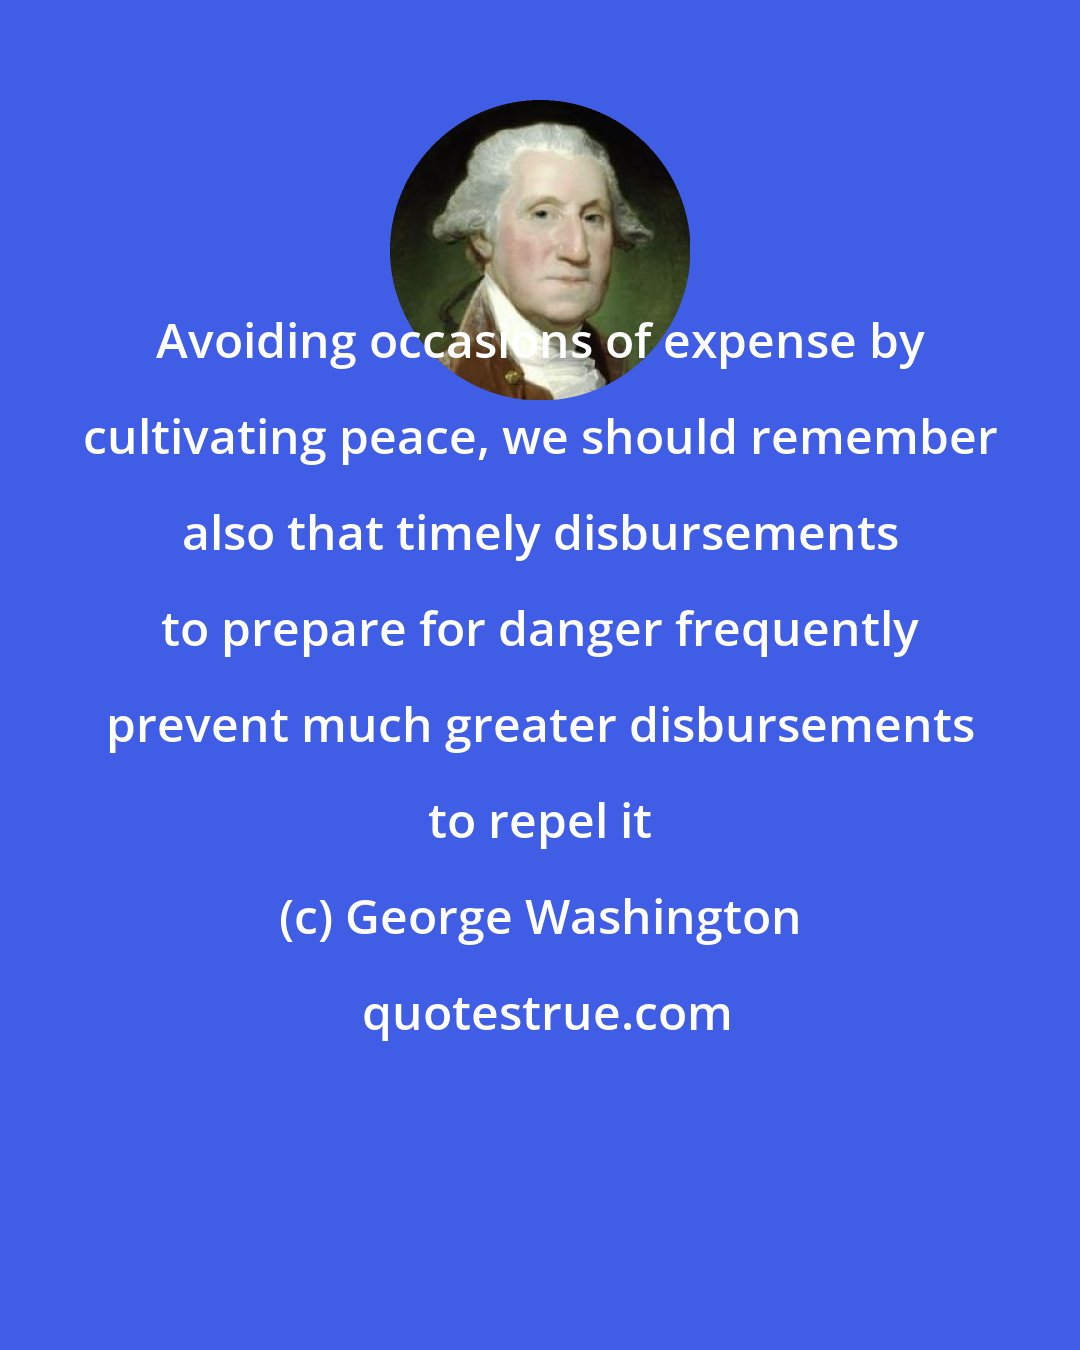 George Washington: Avoiding occasions of expense by cultivating peace, we should remember also that timely disbursements to prepare for danger frequently prevent much greater disbursements to repel it